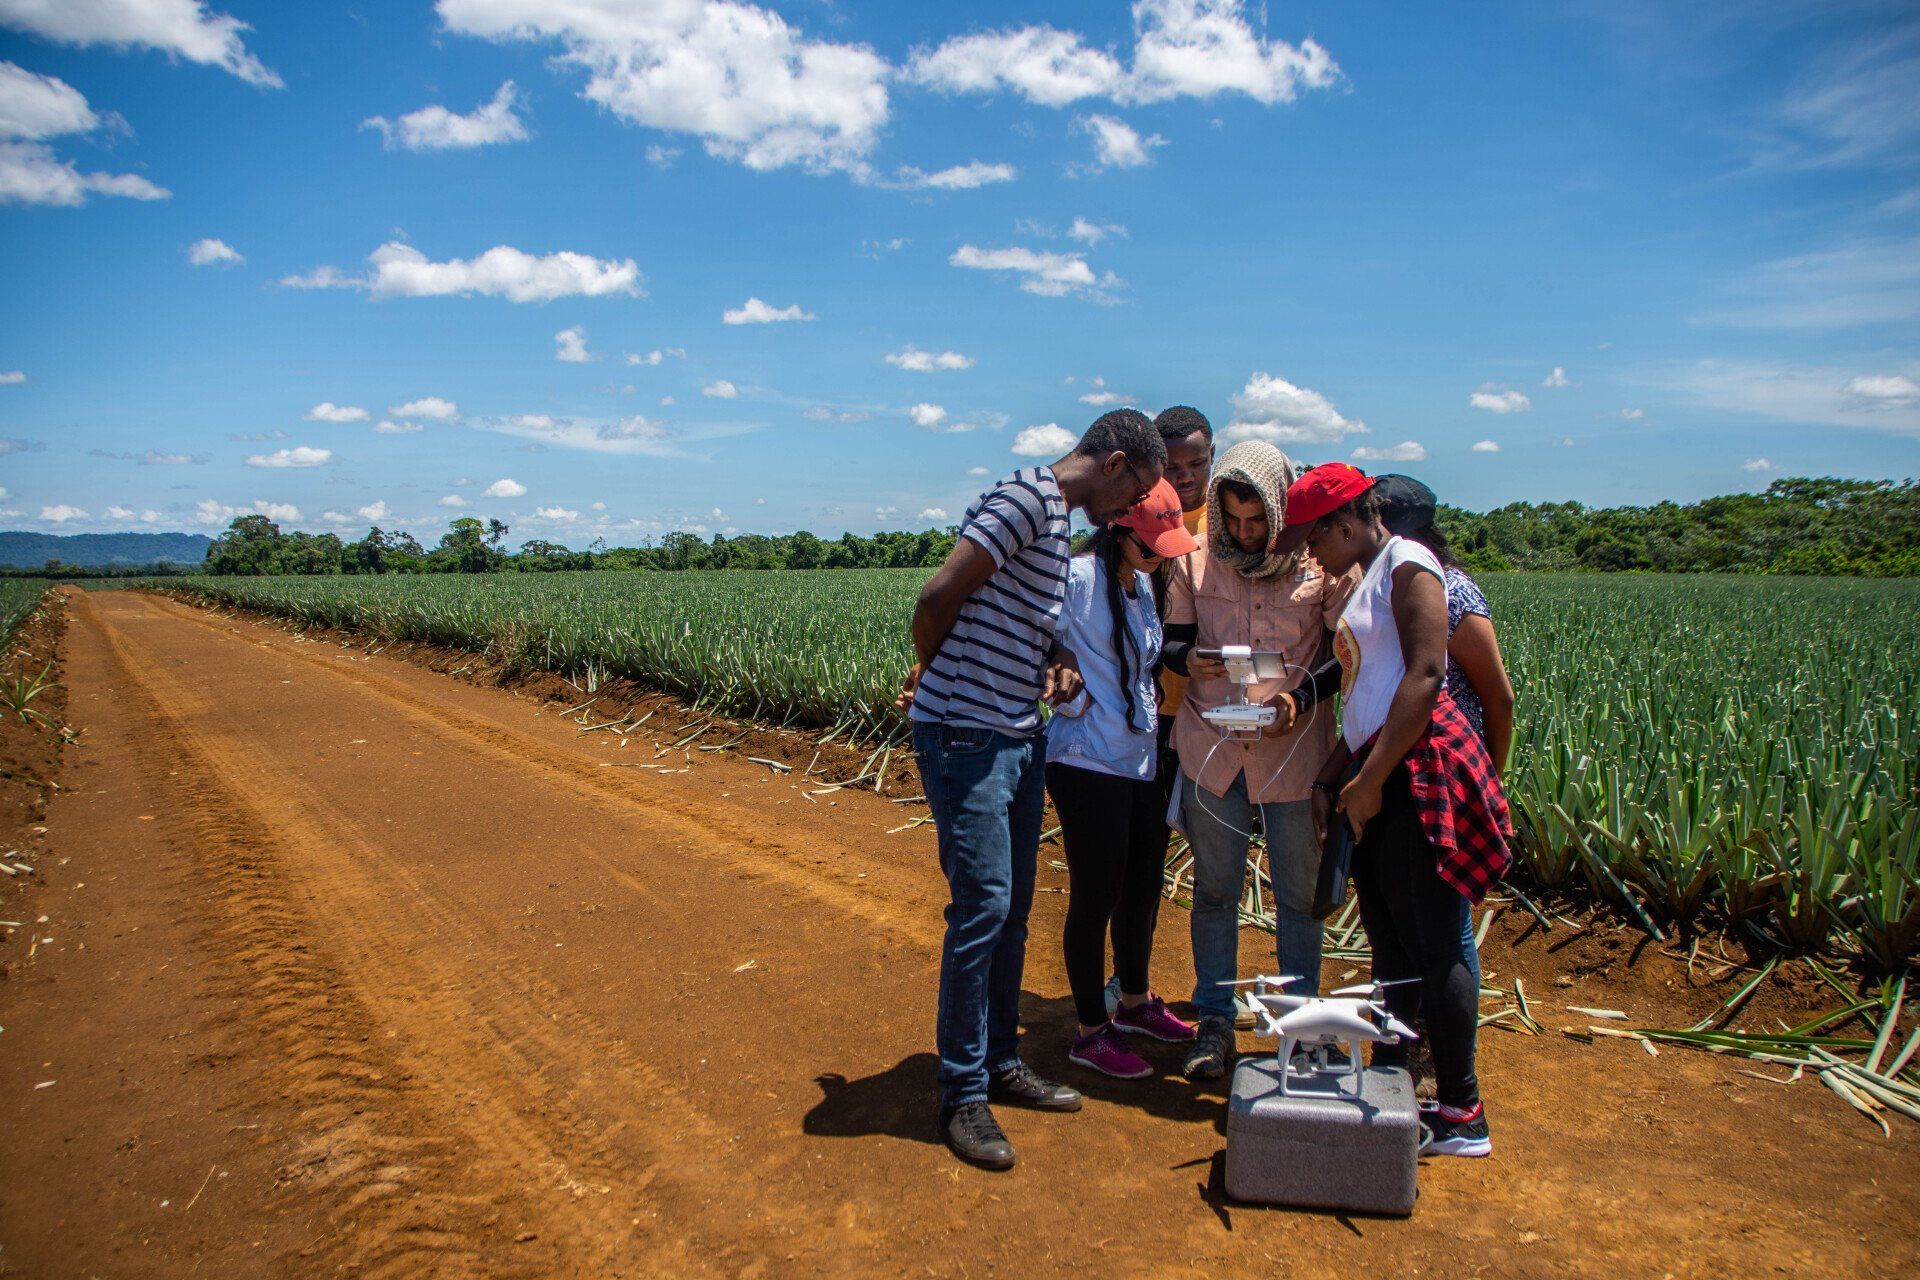 A group of people are standing on a dirt road looking at a drone.